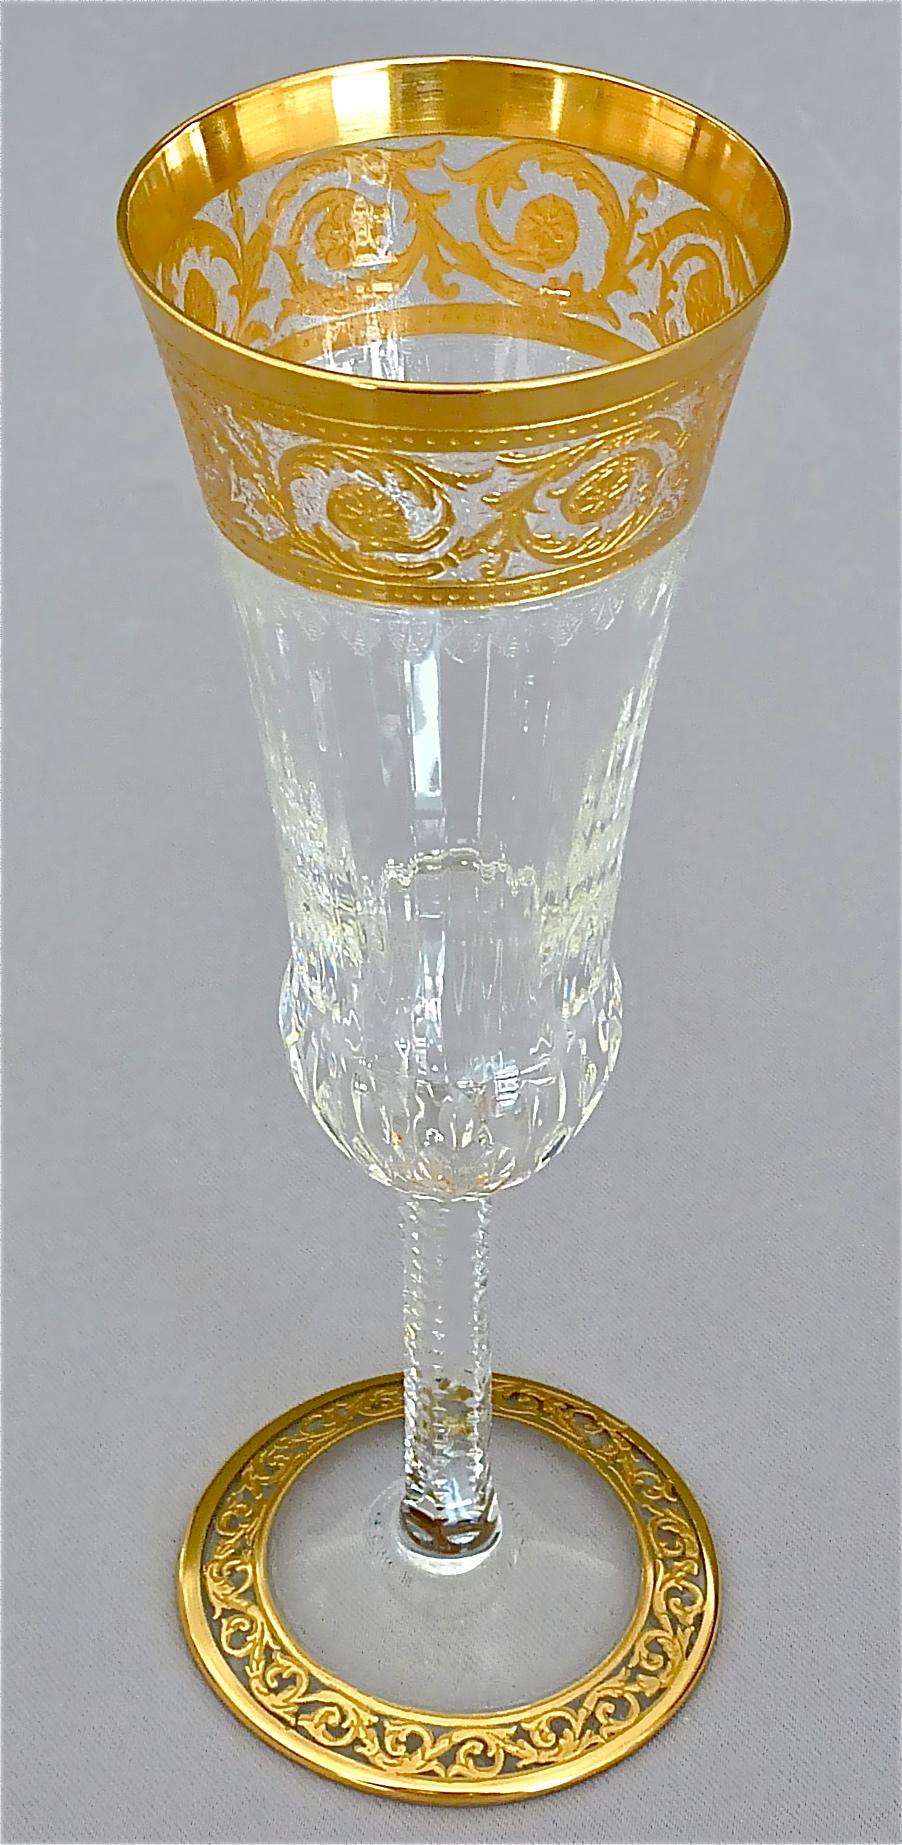 24 Saint Louis Gilt Crystal Champagne Red White Wine Water Glasses Thistle 1950s 9